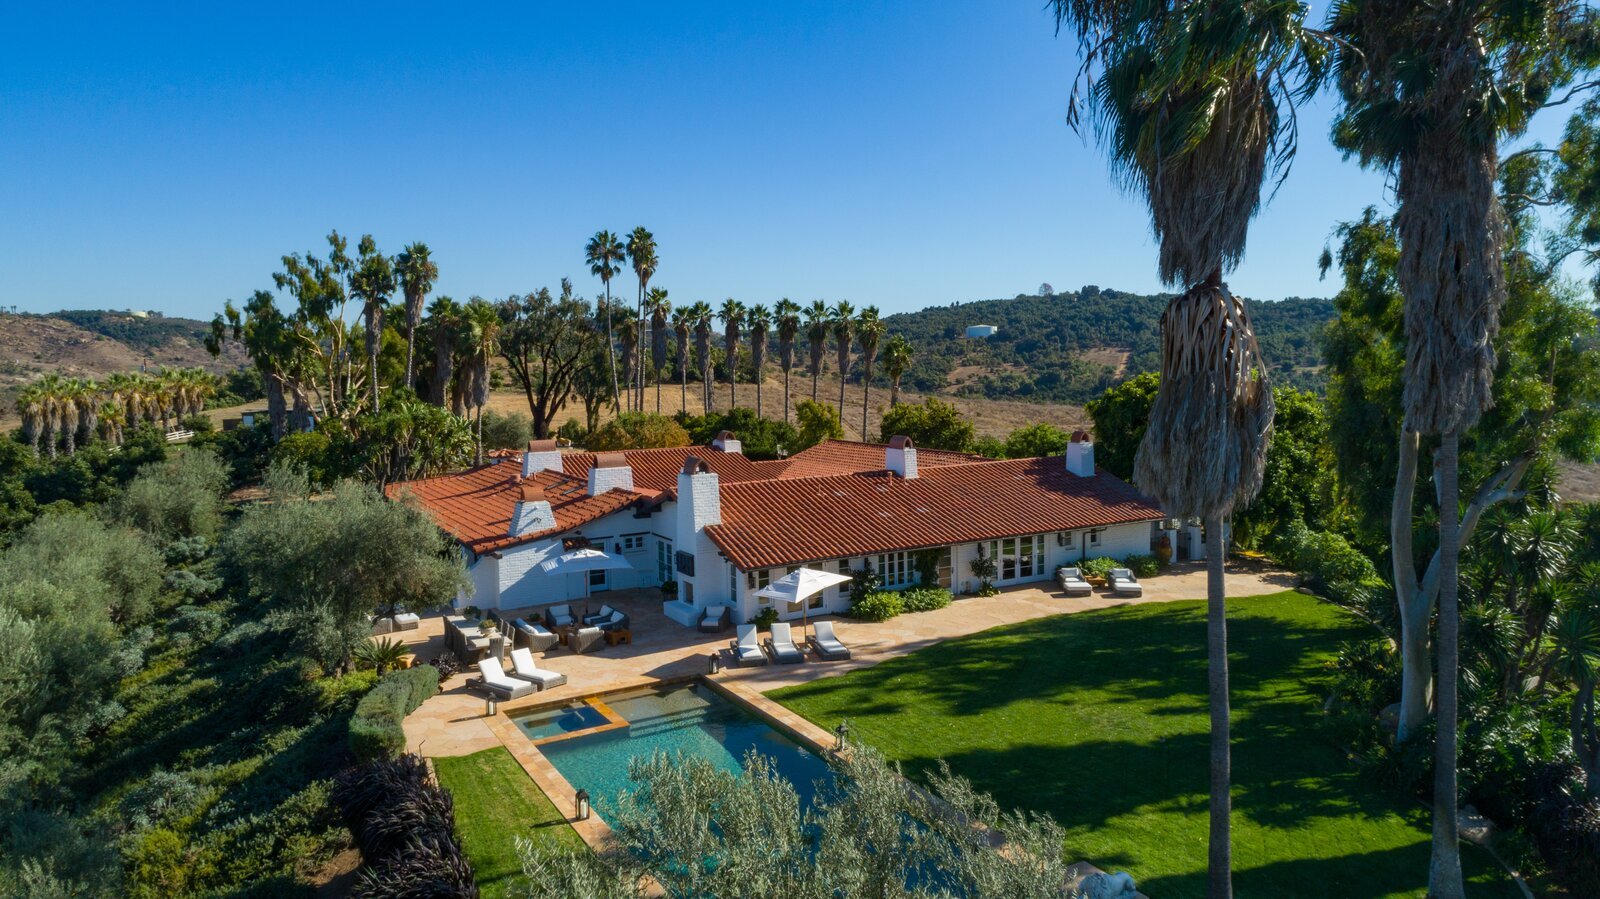 Sandra Bullock Lists Her 91-Acre San Diego Compound for $6M